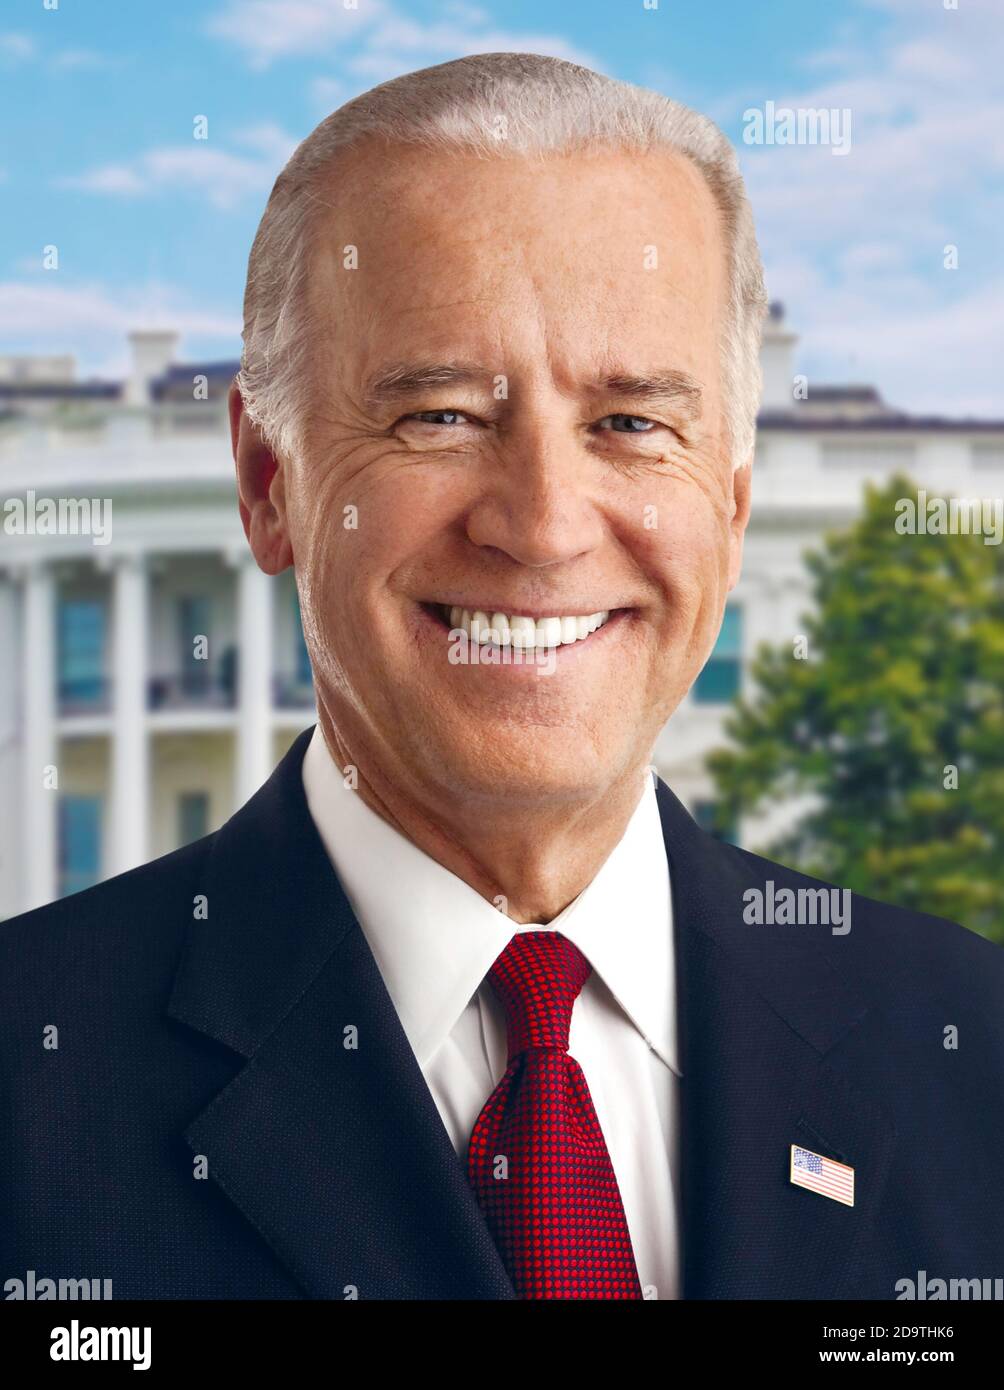 POTUS, The 46 th President of the United States, elected Joe Biden: Portrait shoot by Andrew 'Andy' Cutraro. Stock Photo